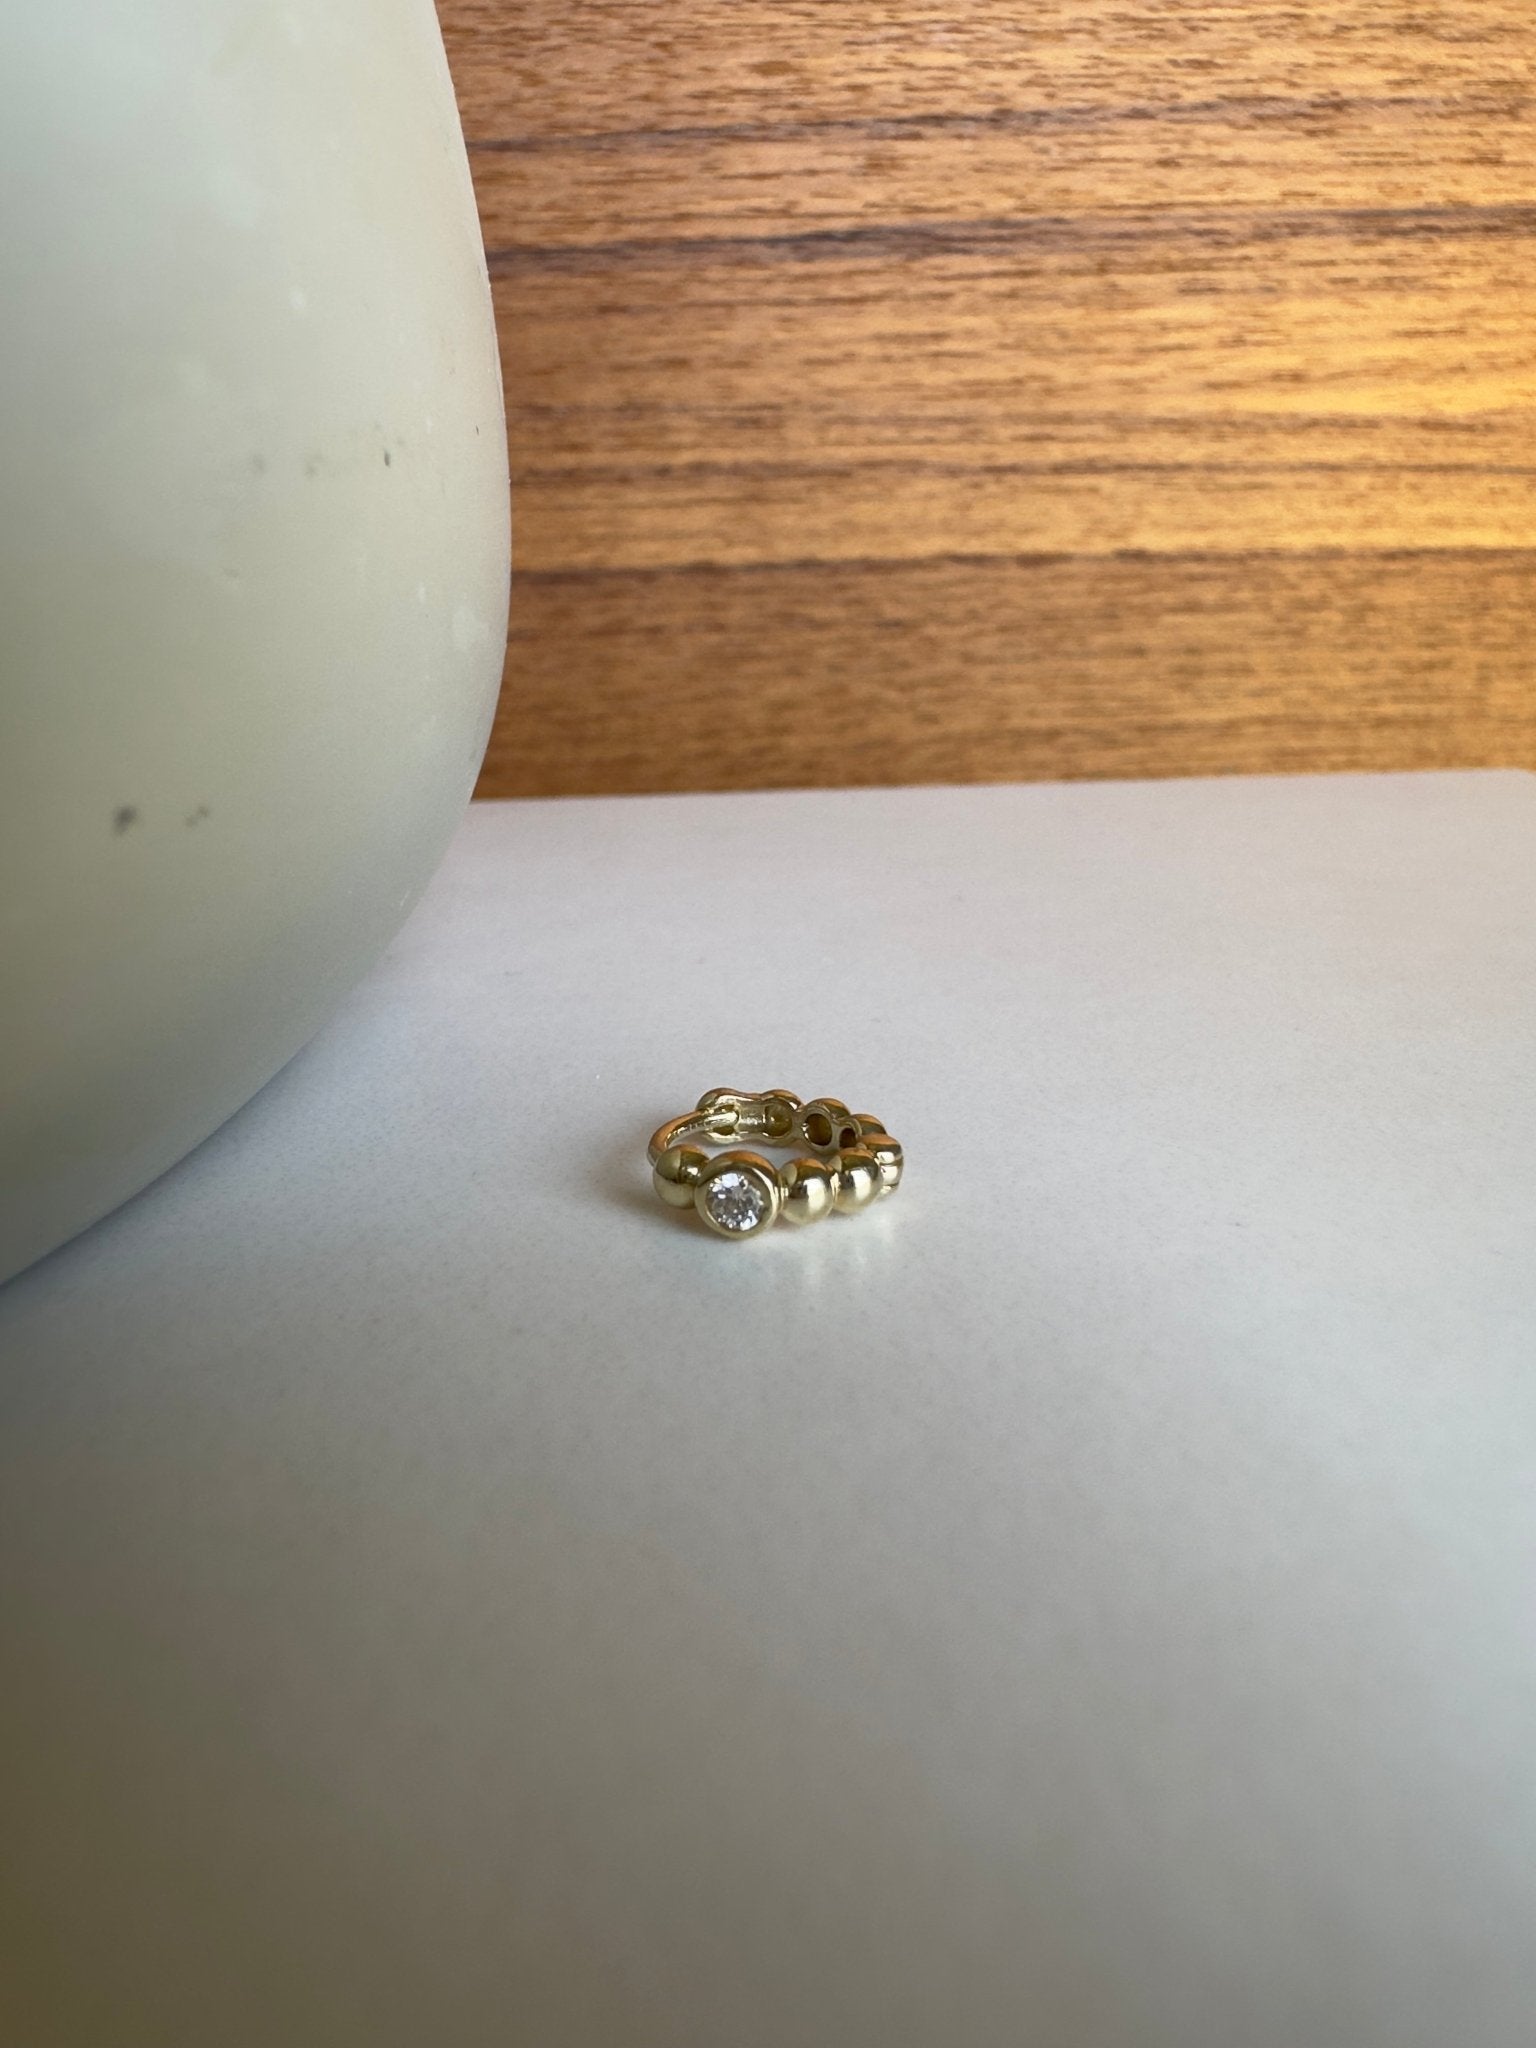 Diamond Beaded Huggie Hoop Earring in Solid 14k Yellow Gold Earrings Estella Collection #product_description# 18522 14k April Birthstone Birthstone #tag4# #tag5# #tag6# #tag7# #tag8# #tag9# #tag10#